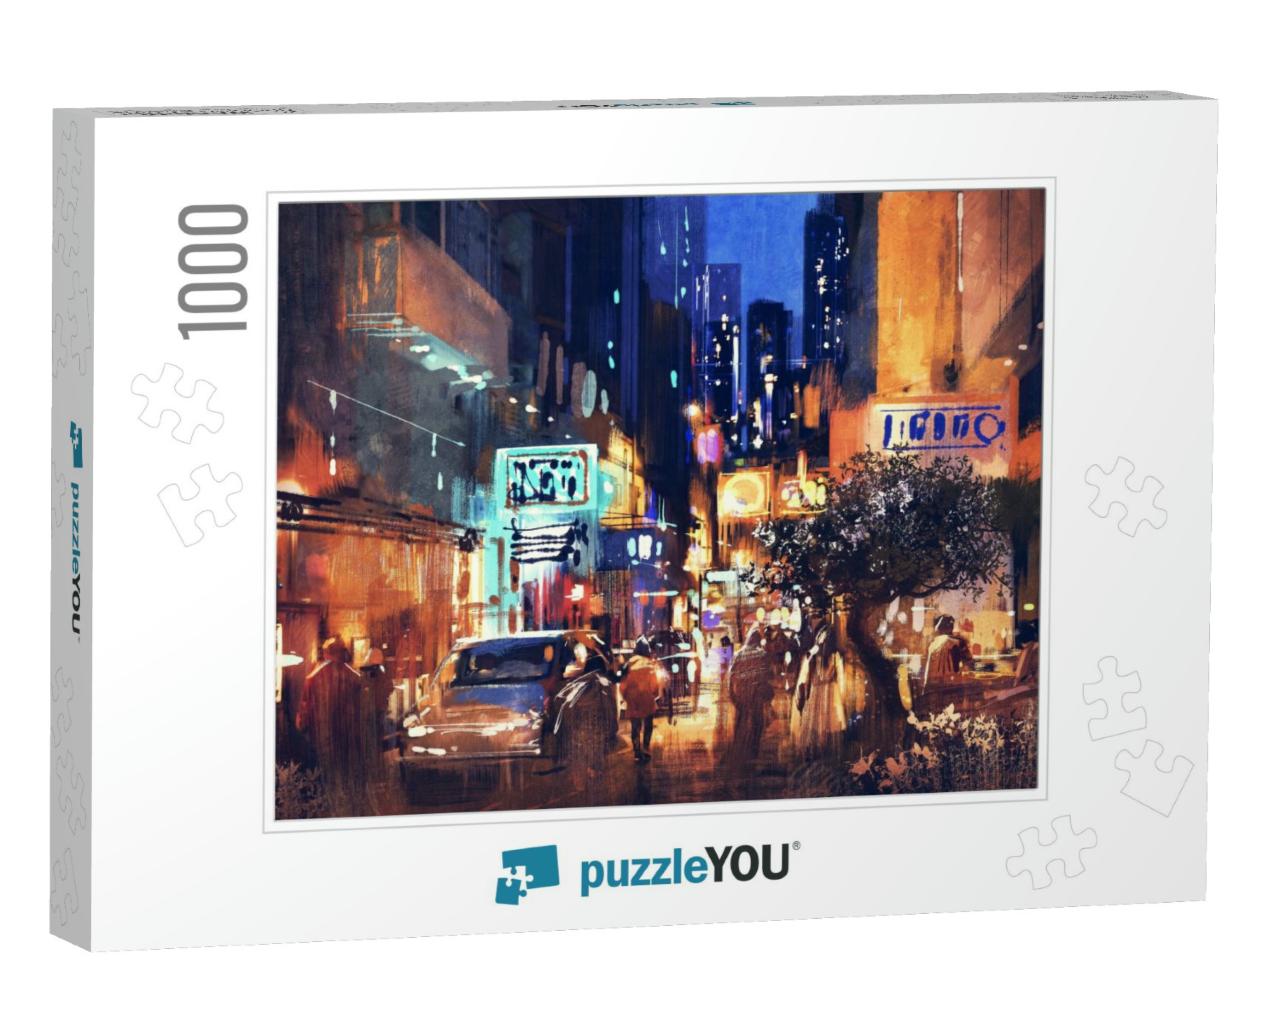 Colorful Painting of Night Street, Illustration Art... Jigsaw Puzzle with 1000 pieces